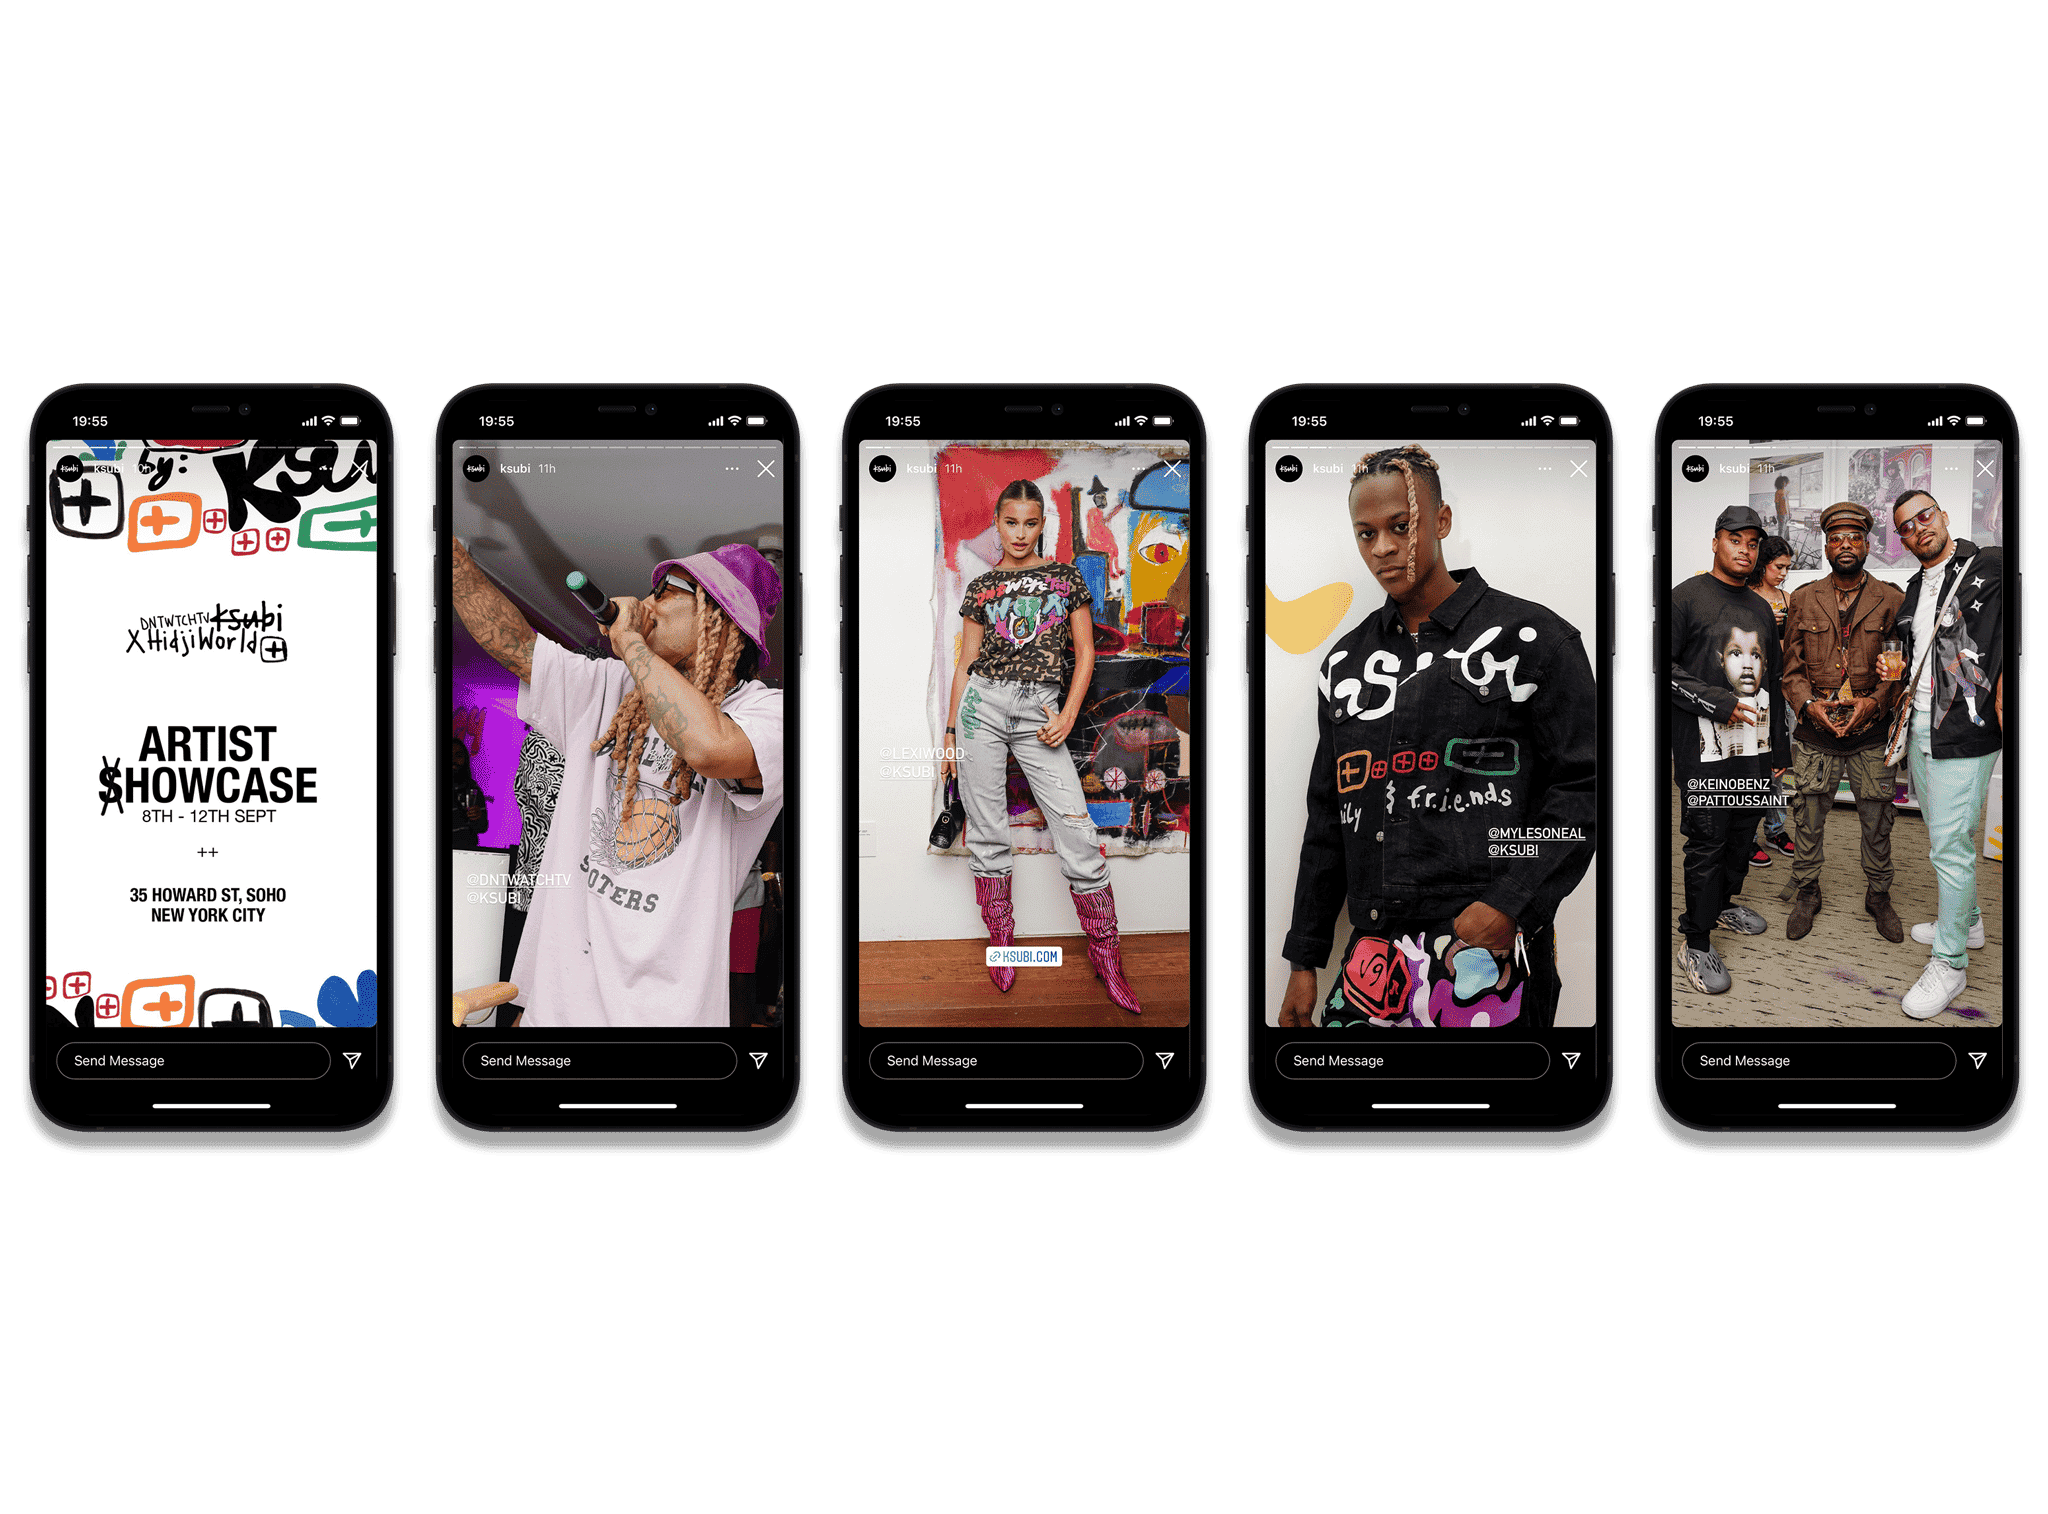 iPhone screens showing Instagram Stories of a Ksubi event